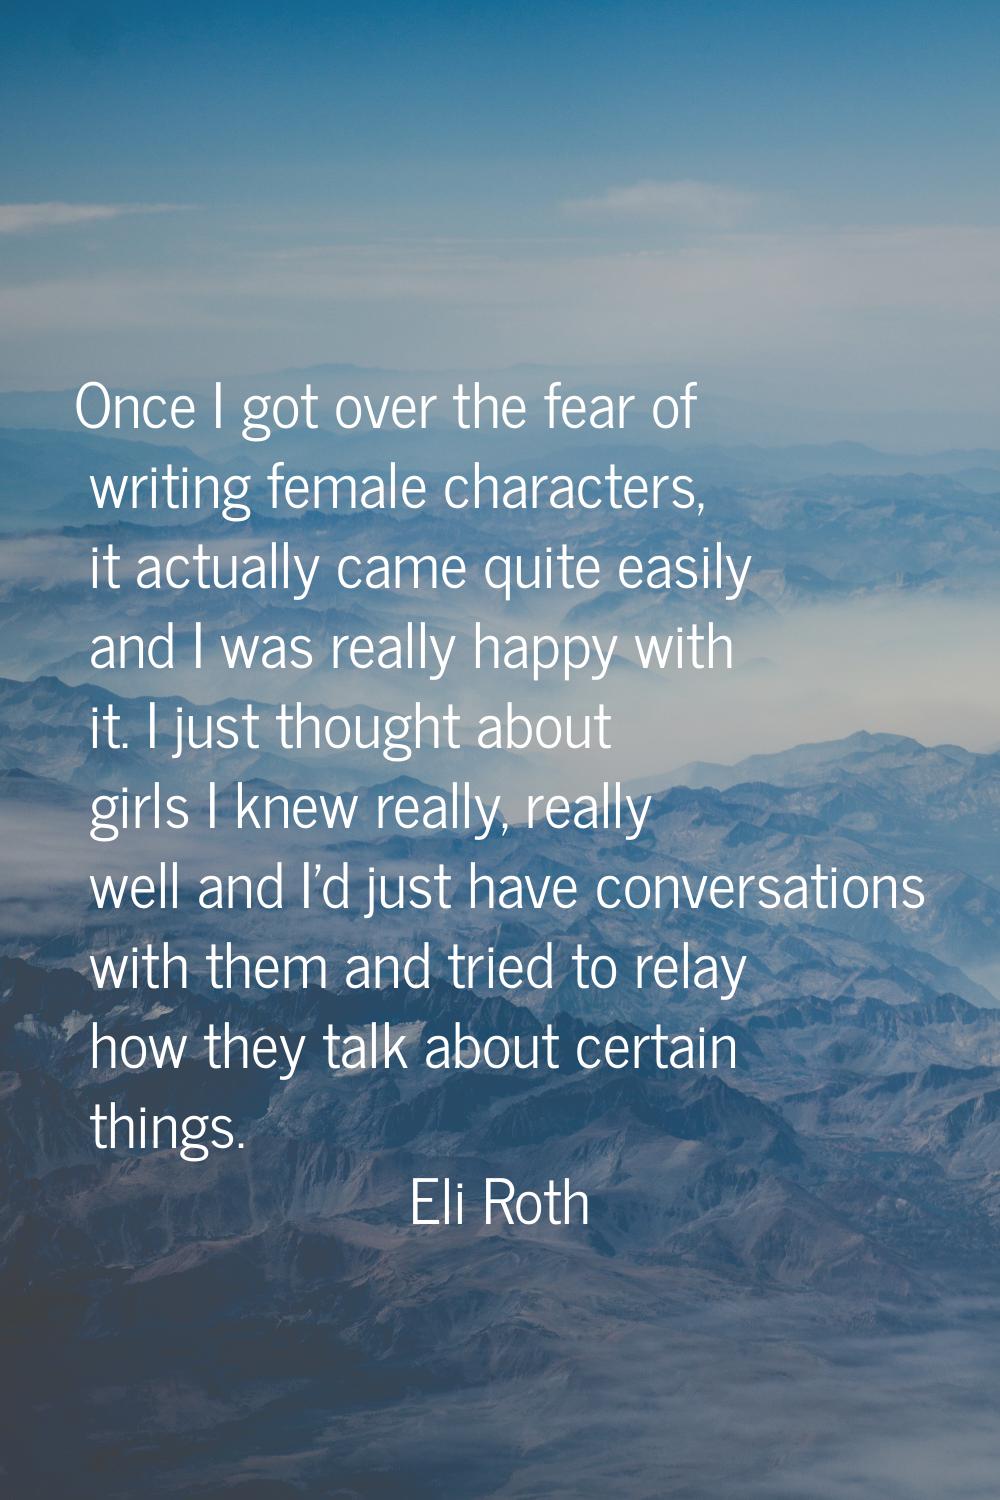 Once I got over the fear of writing female characters, it actually came quite easily and I was real